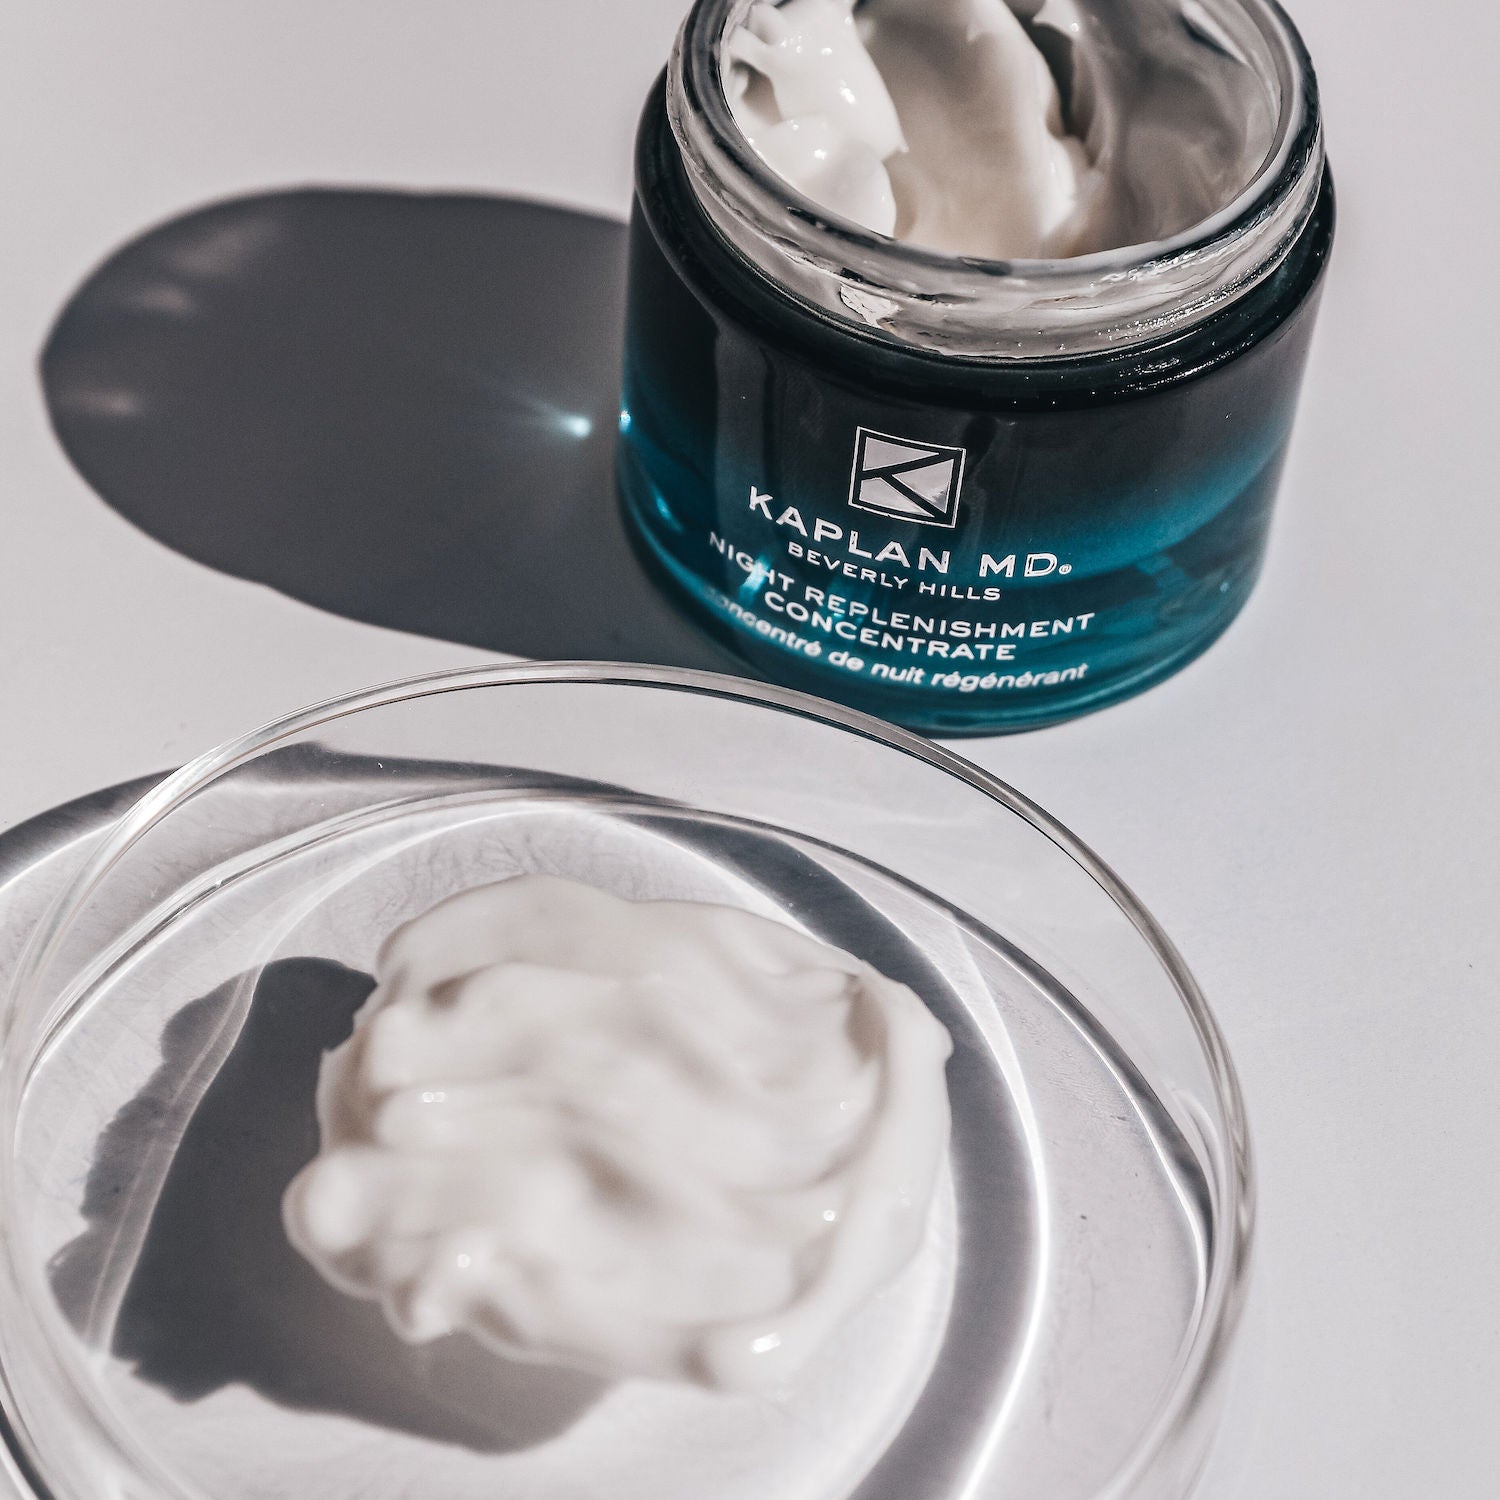 Night Replenishment Concentrate holds key ingredients that make an intense and visible difference in your skin